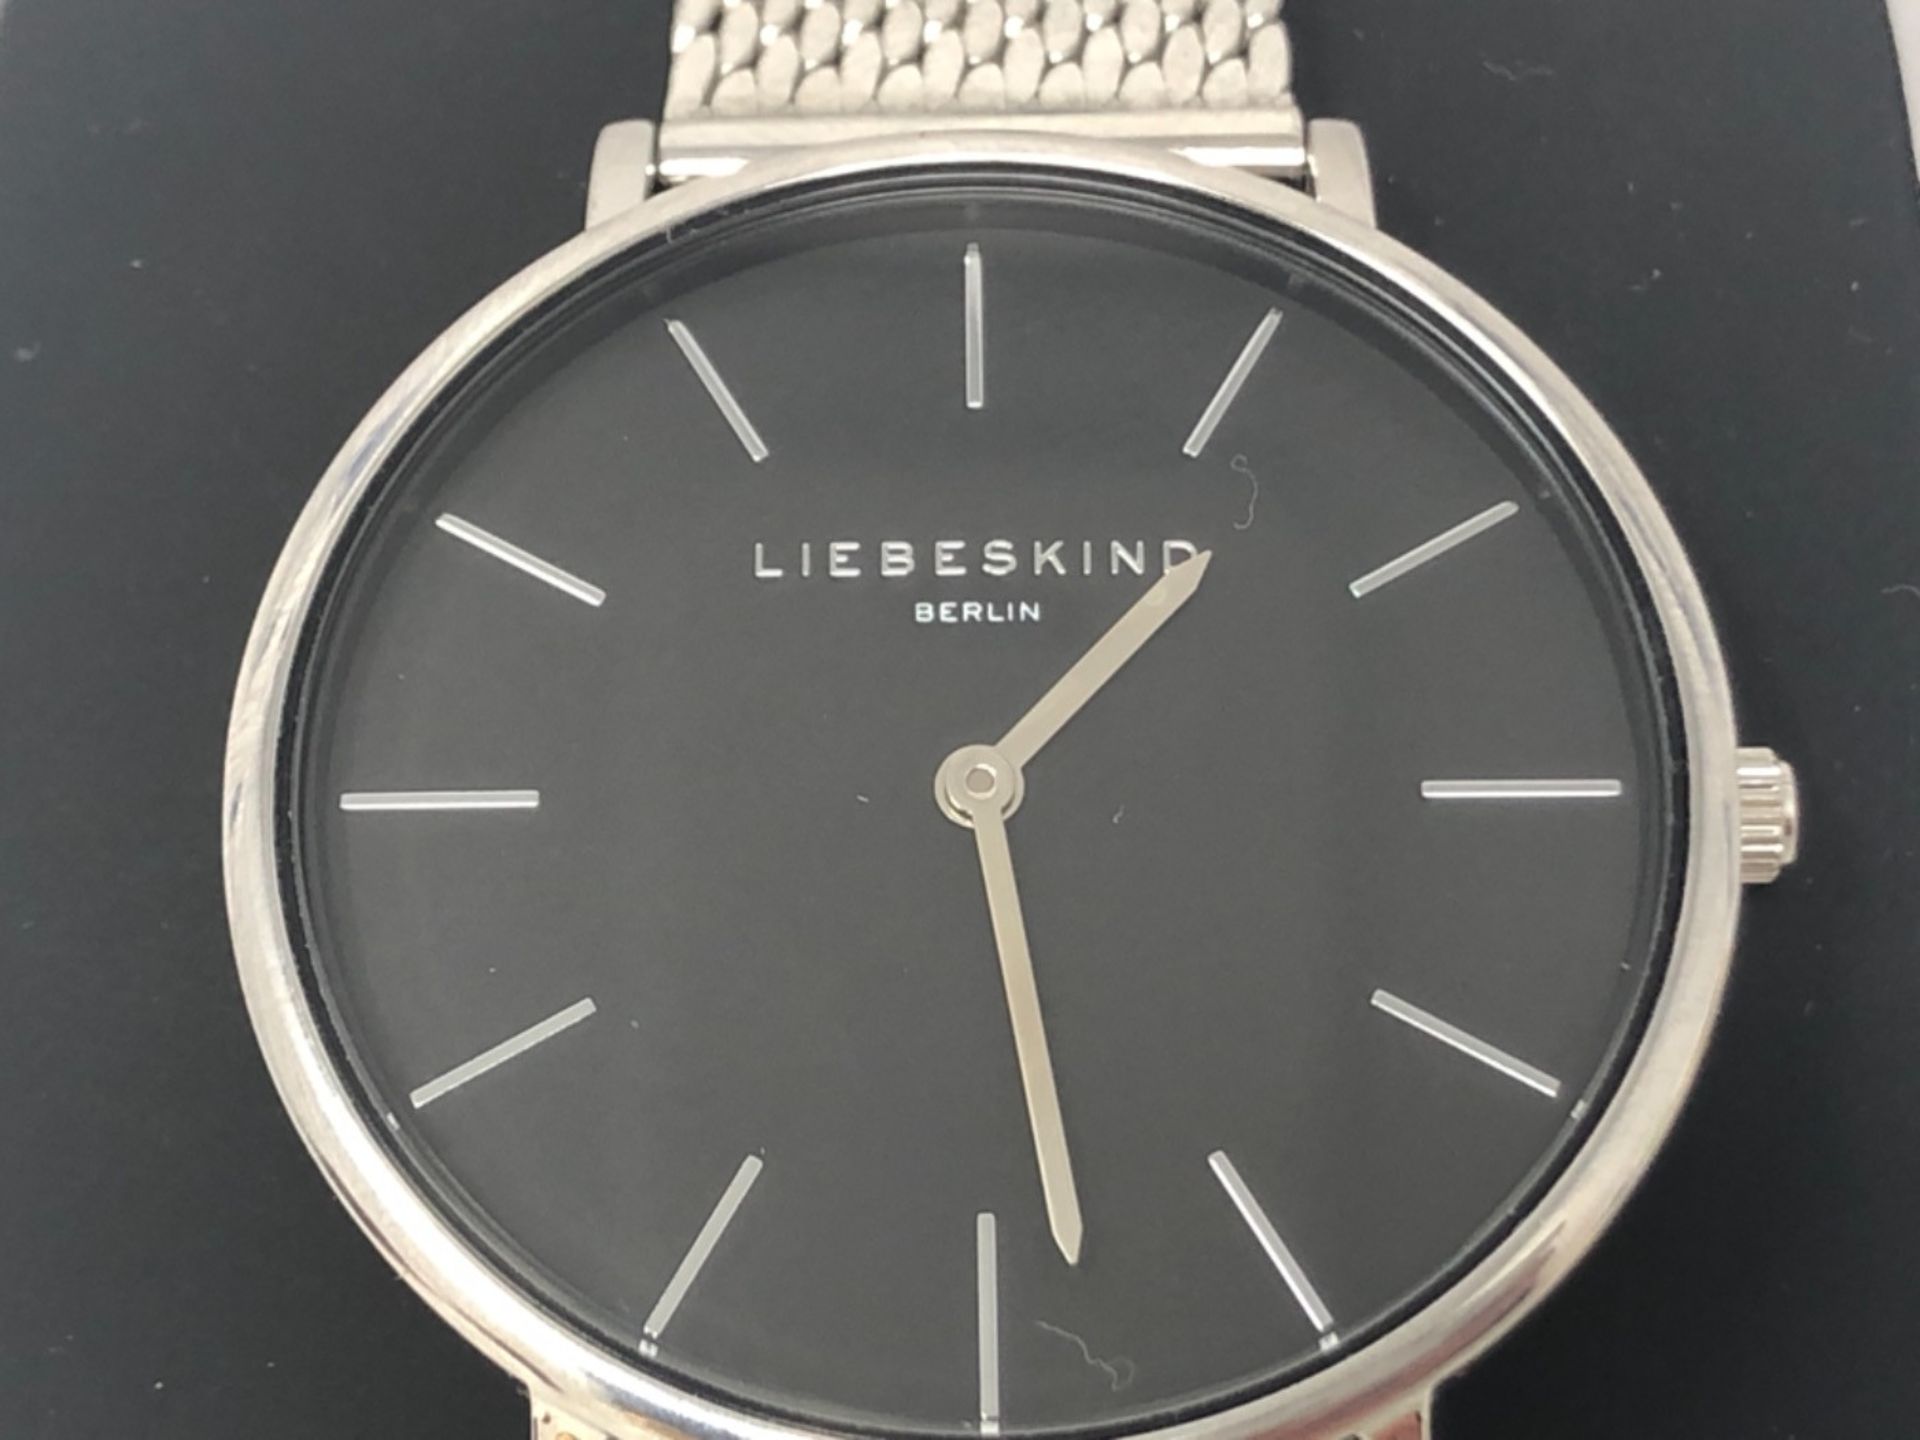 RRP £78.00 Liebeskind Analogue Quartz Watch with Stainless Steel Strap - Image 3 of 3